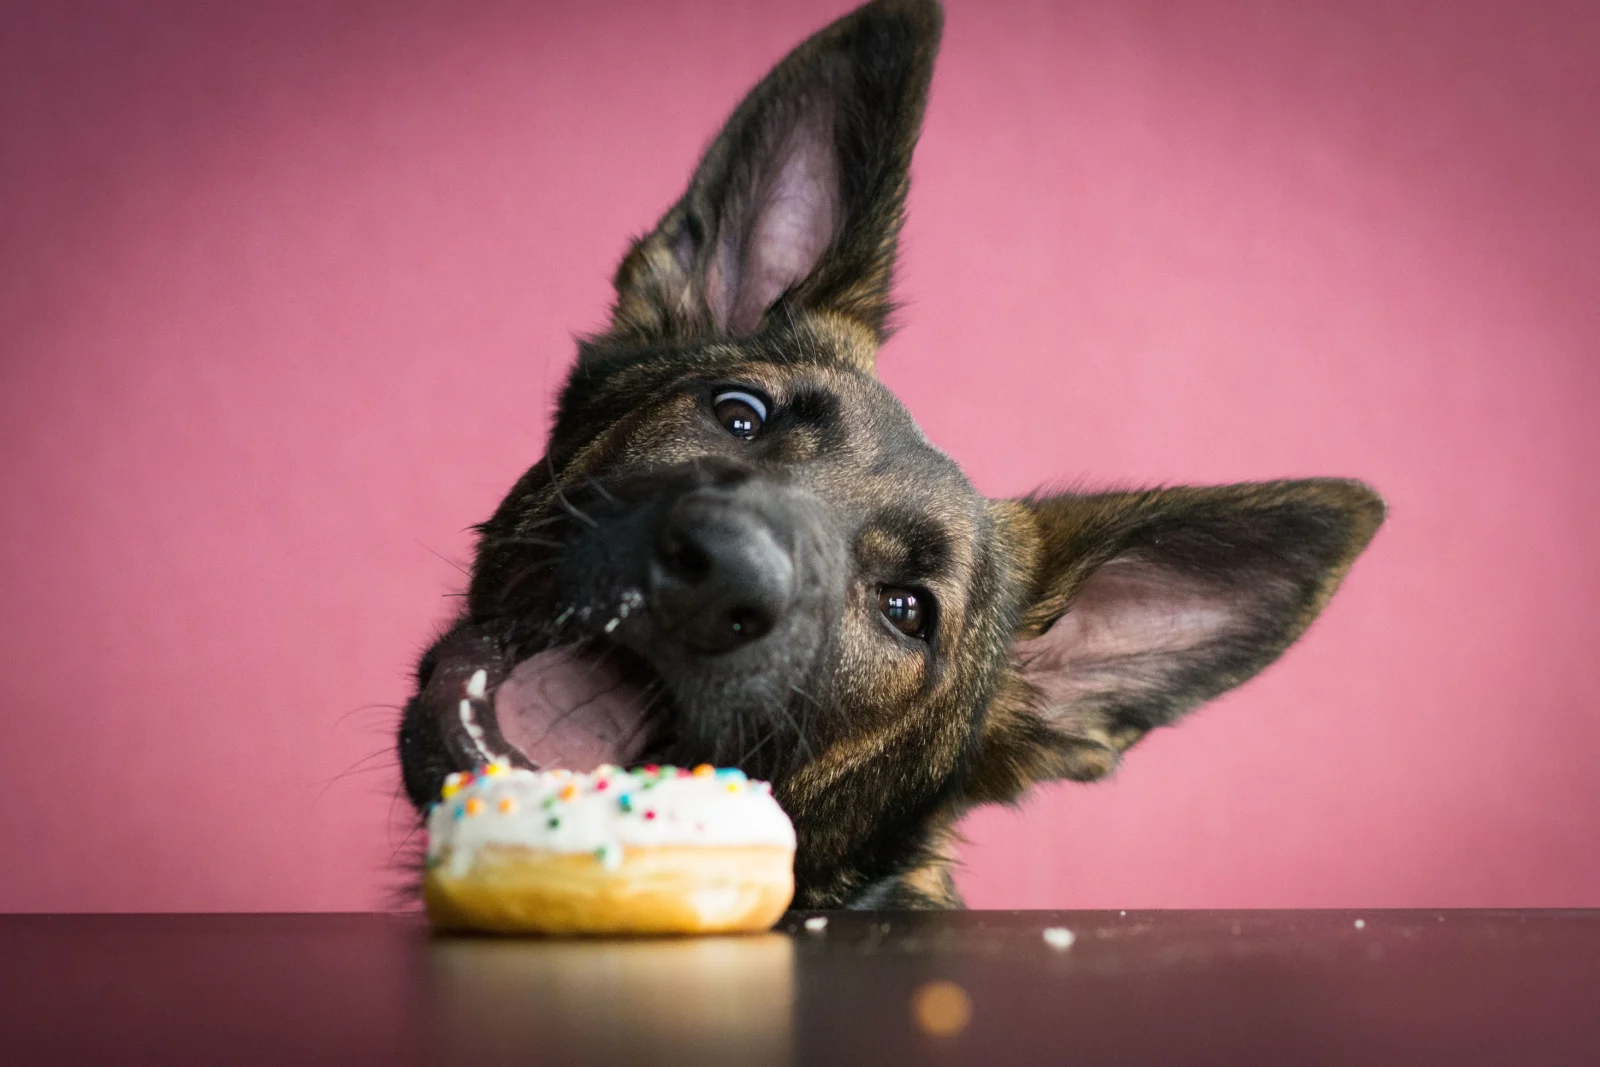 german shepherd trying to eat a donut off the table